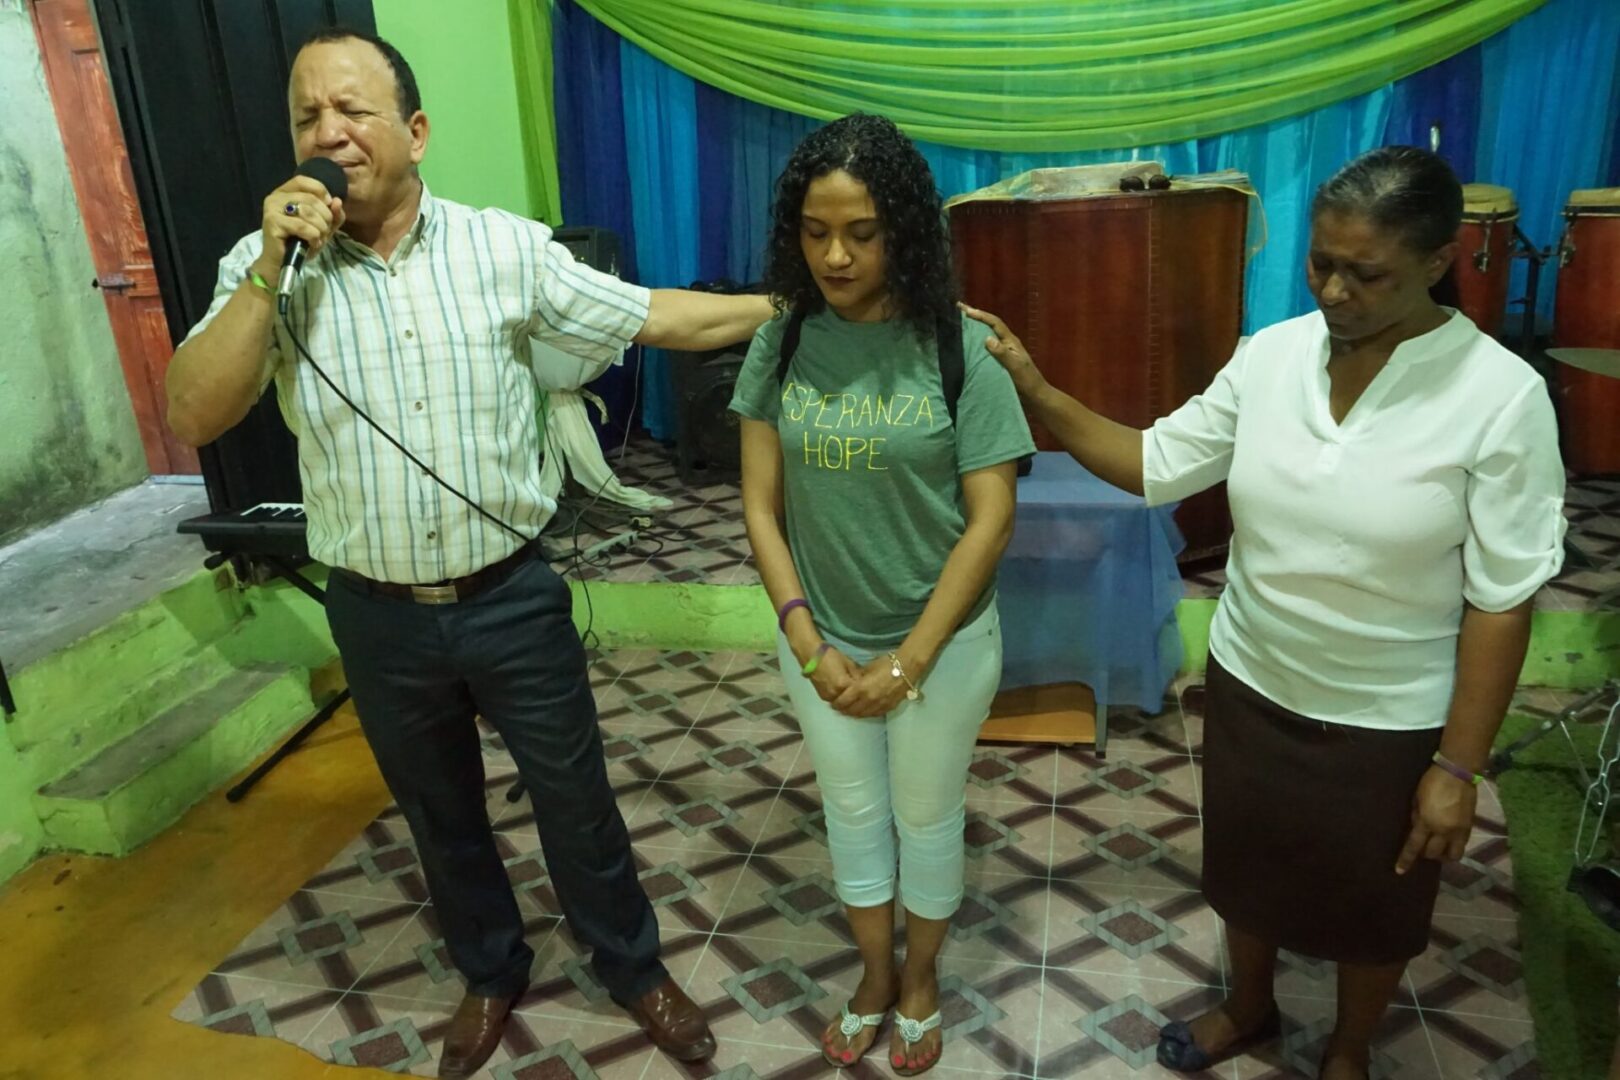 A man speaking into a mic and two women, all of them with their eyes closed